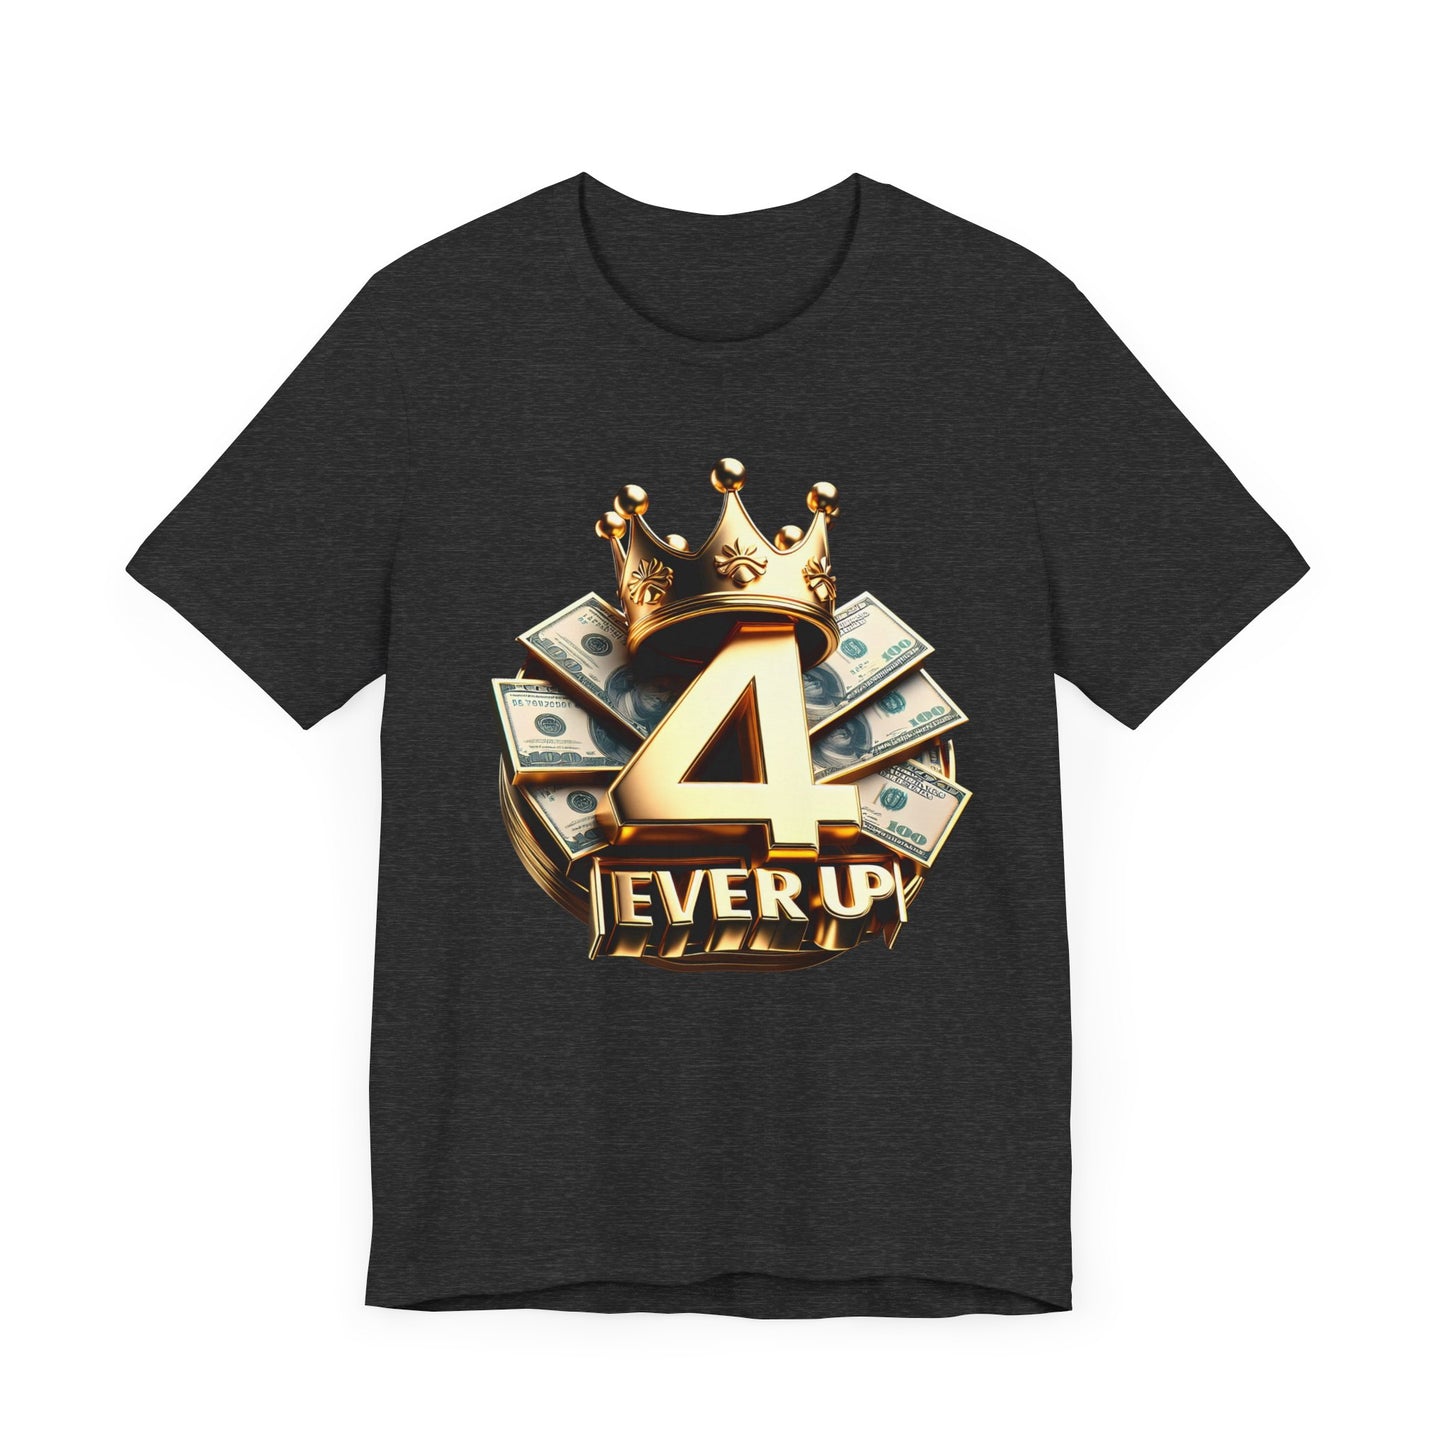 4 Ever Up Tee